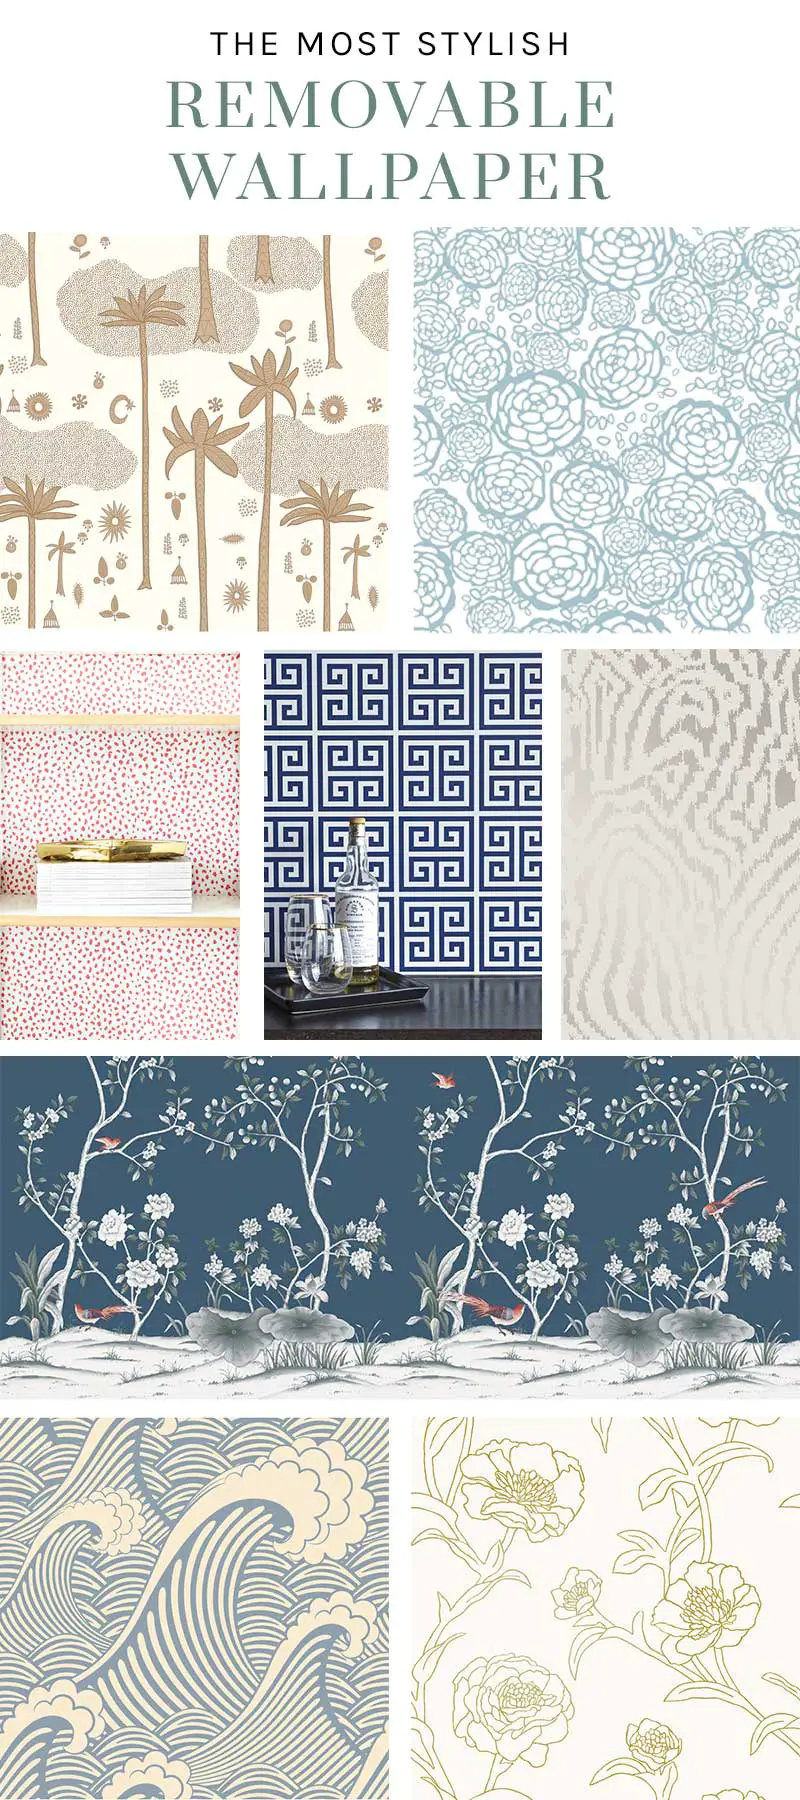 Stylish removable wallpaper designs on Thou Swell @thouswellblog